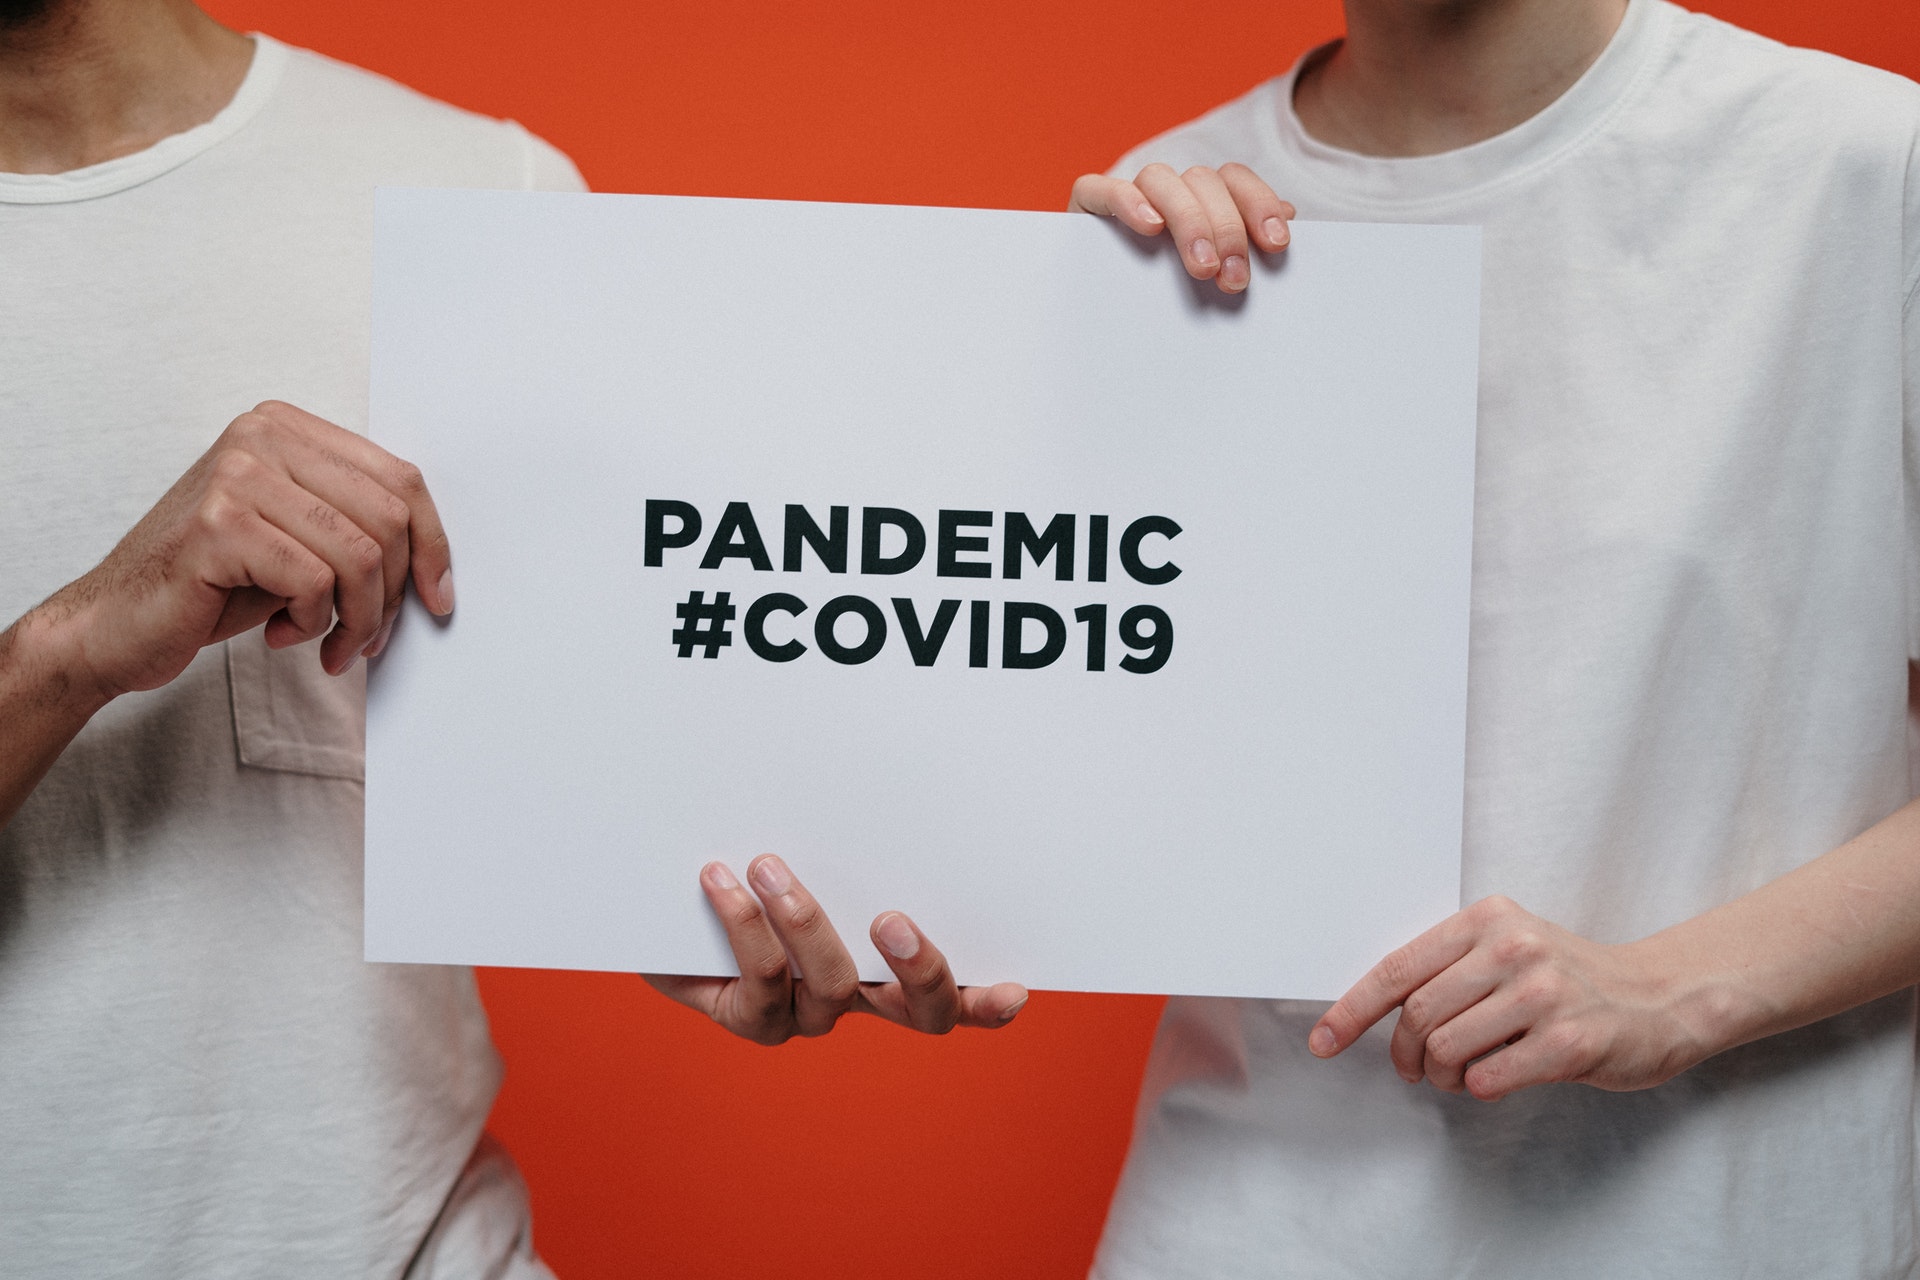 Two persons holding a placard with "PANDEMIC #COVID19"